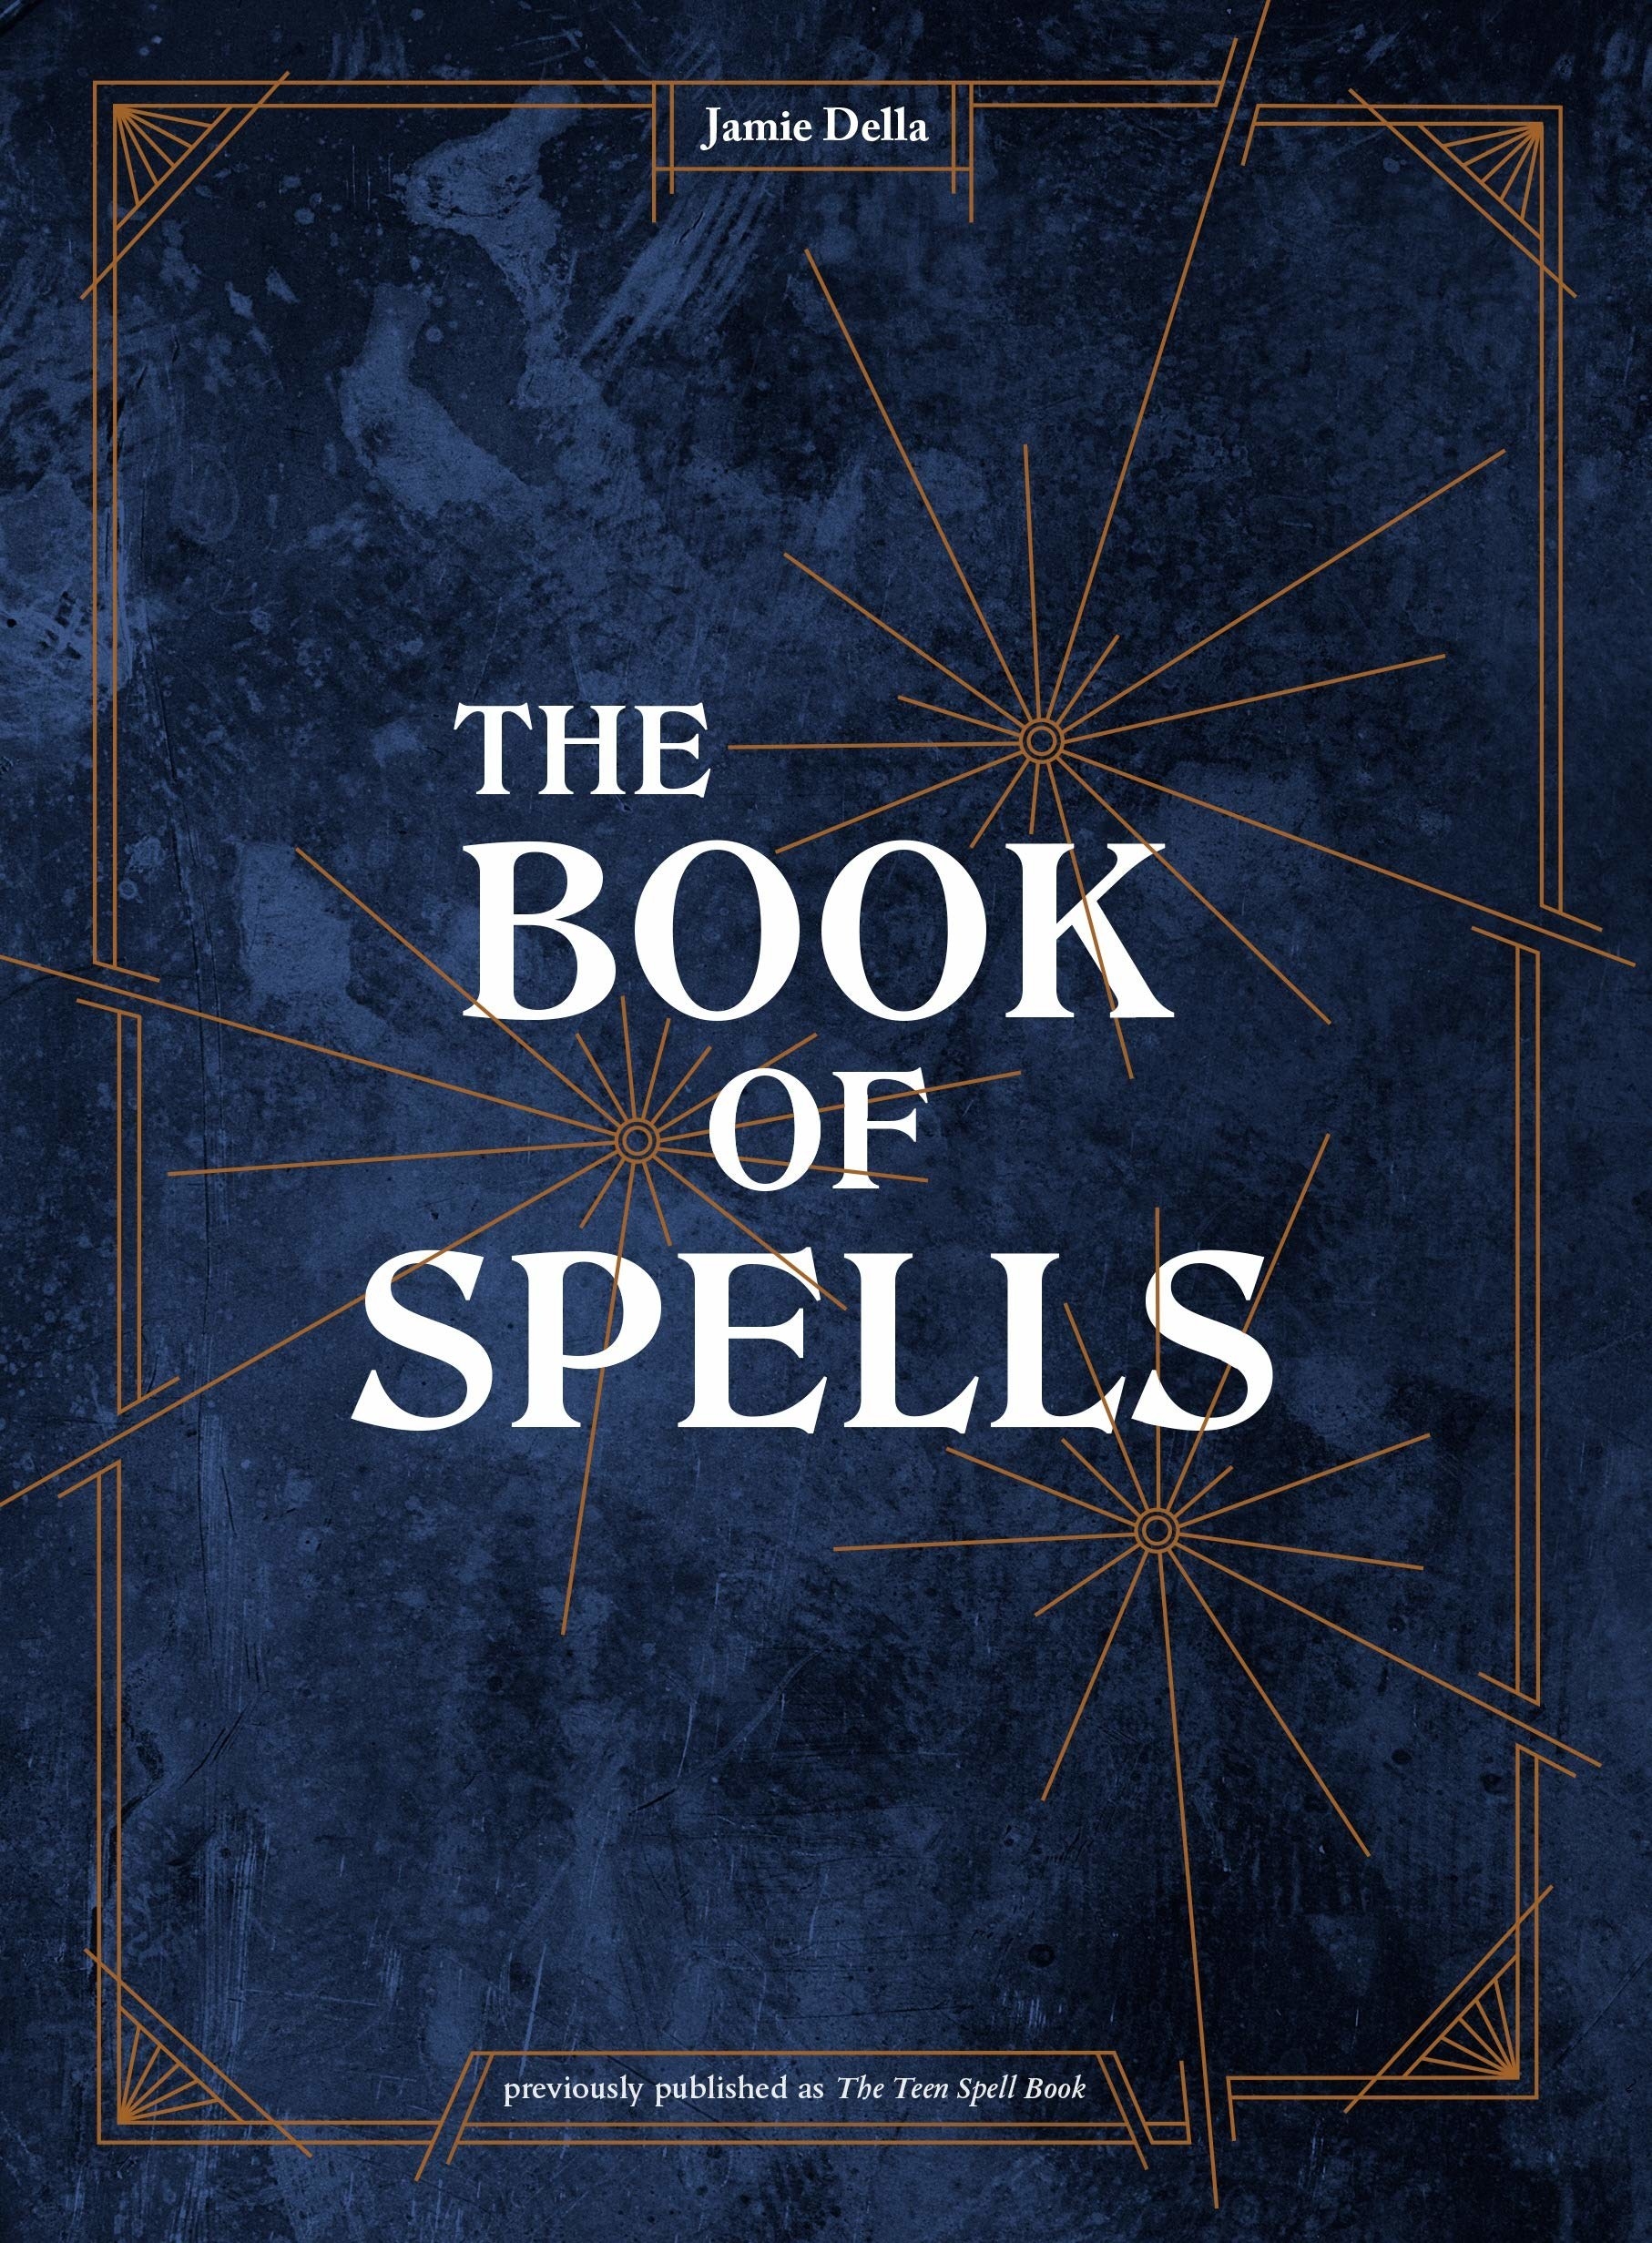 the cover of the book of spells by jamie della